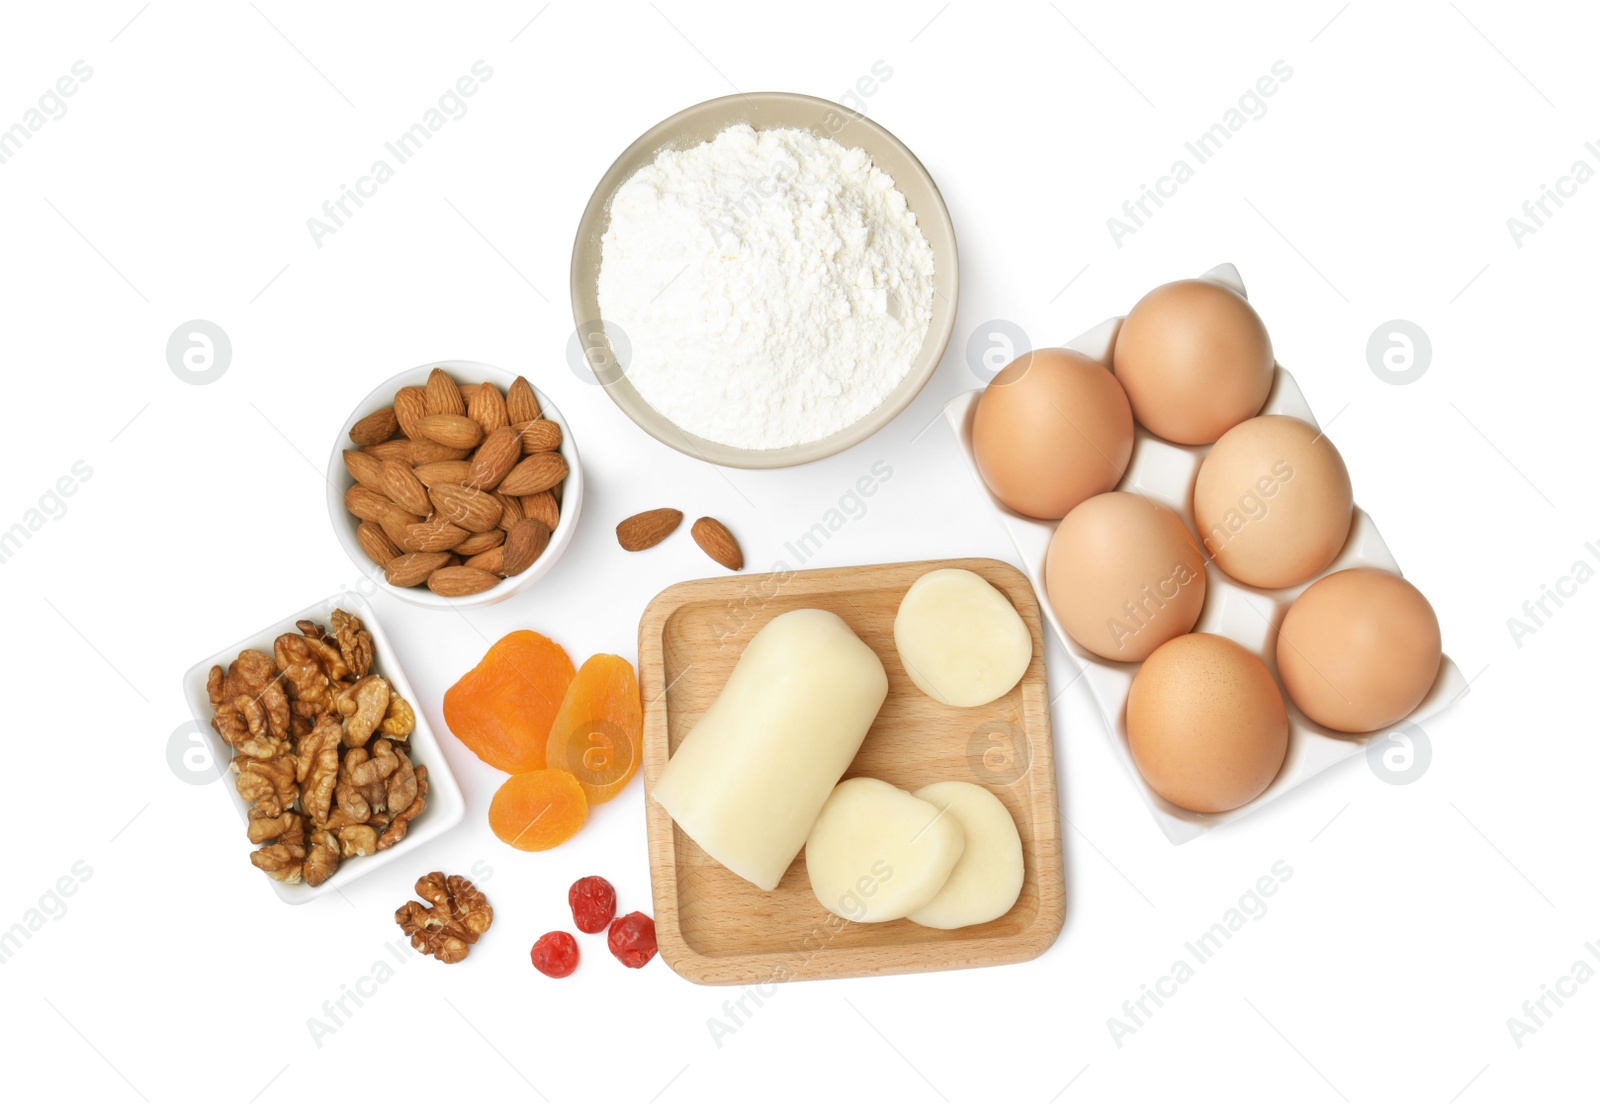 Photo of Marzipan and other ingredients for homemade Stollen on white background, top view. Baking traditional German Christmas bread